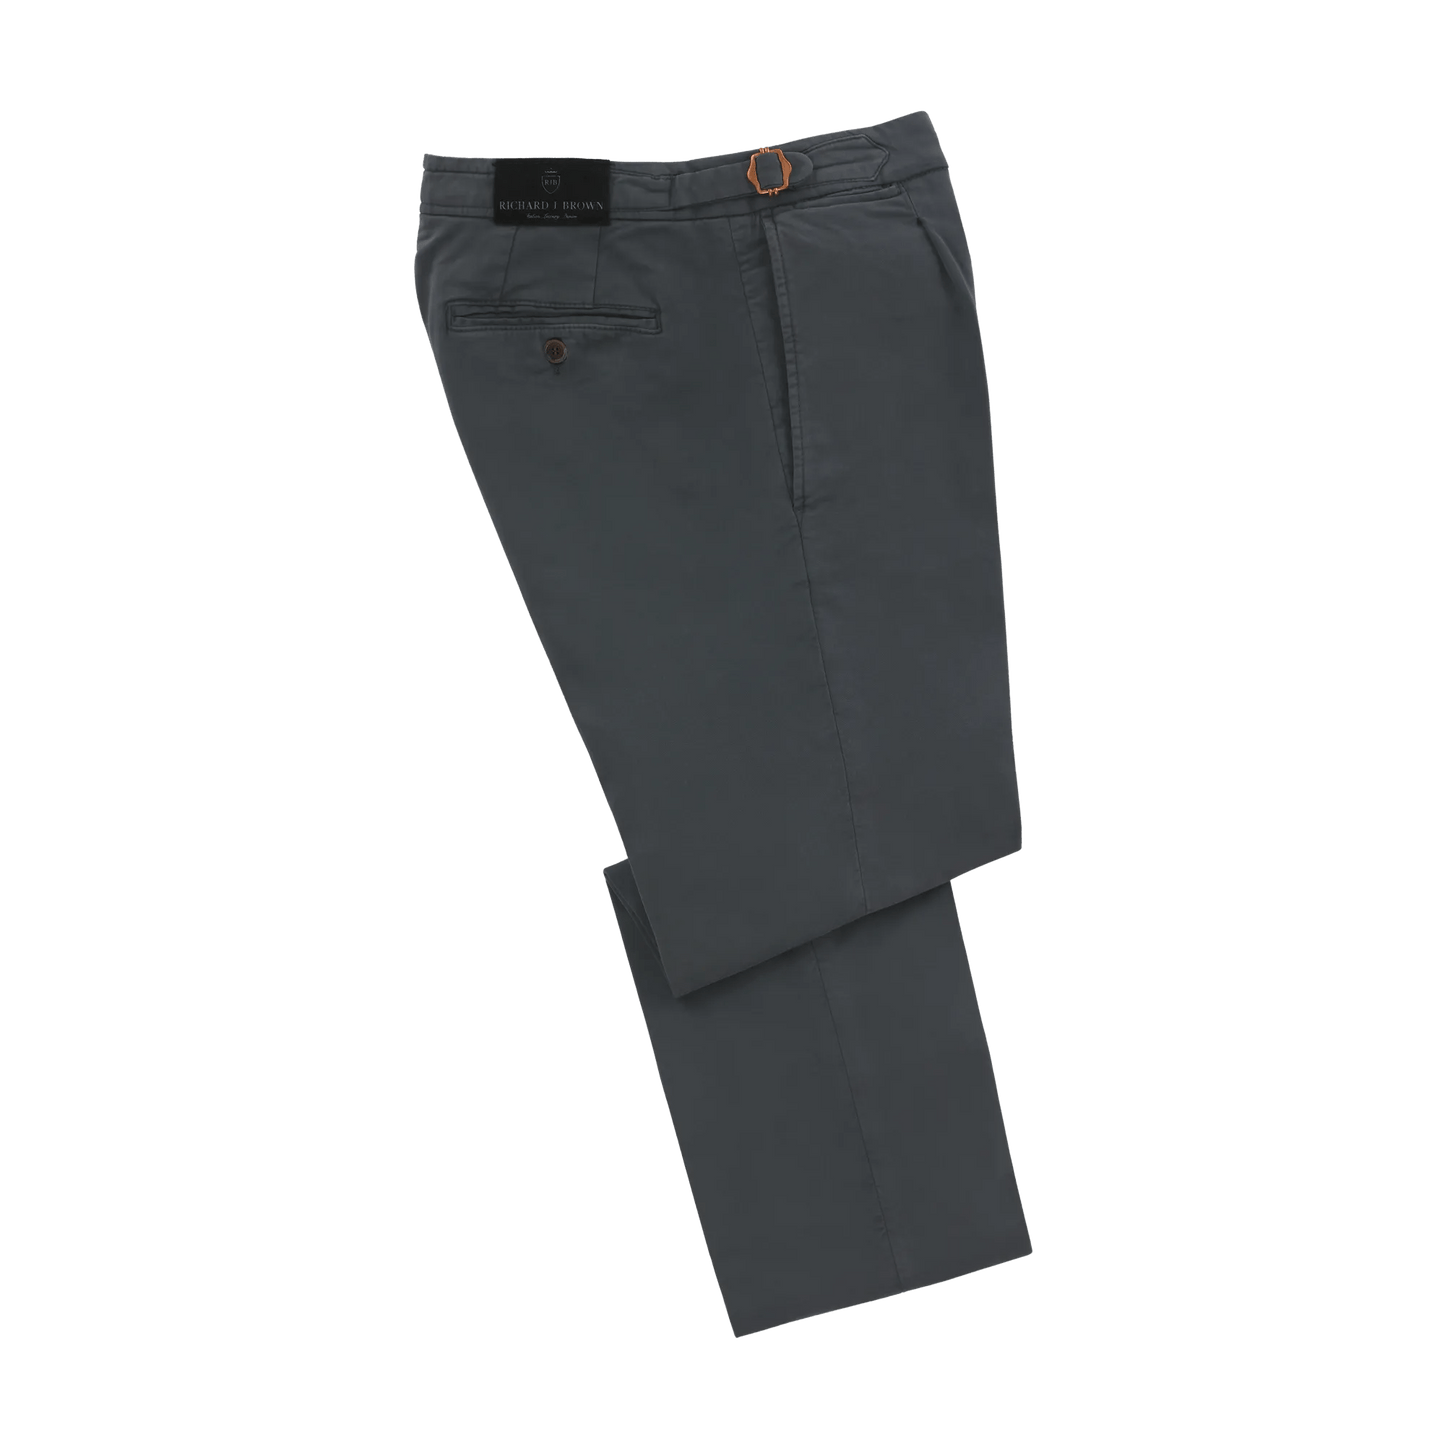 Richard J. Brown Slim - Fit Stretch - Cotton Trousers with Buckle Adjusters in Metallic Grey - SARTALE